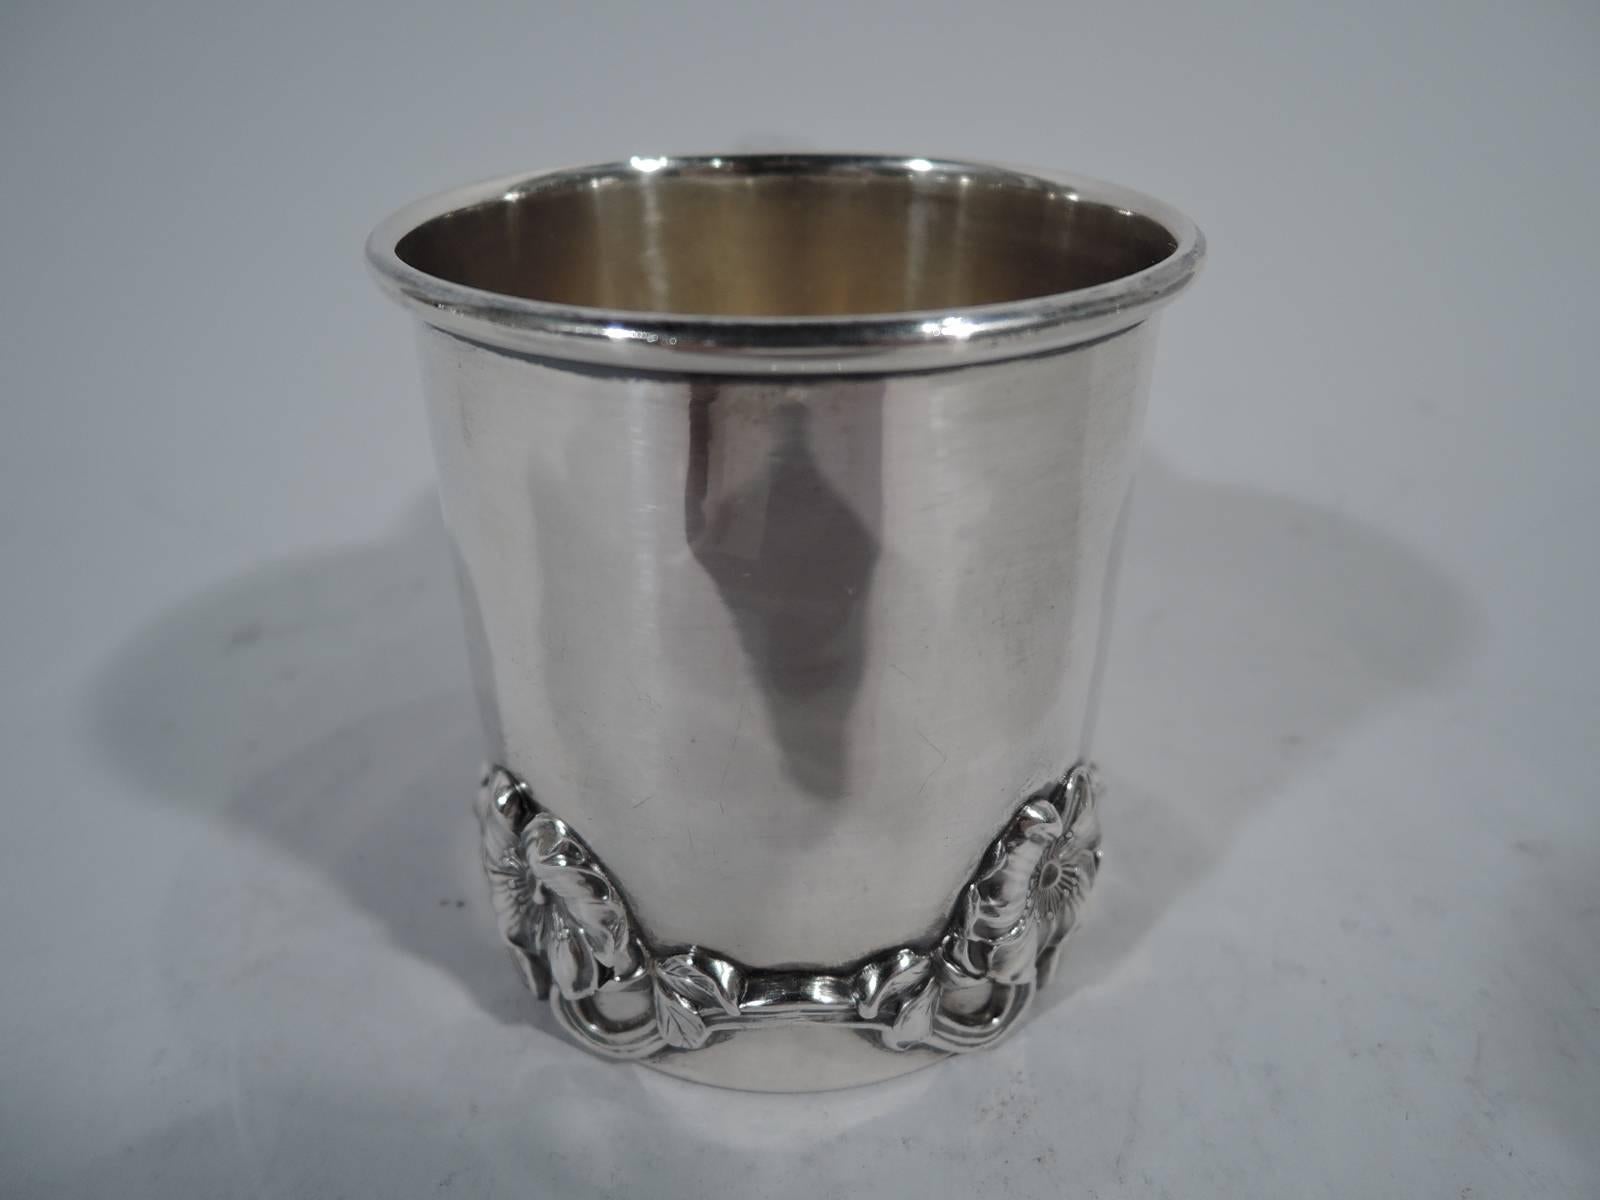 American Art Nouveau sterling silver baby cup. Straight sides and s-scroll handle. Applied flowering branch wraps around base: repeating pattern with pansy-style flower joined by scrolled stems. Fresh and pretty with plenty of room for engraving.